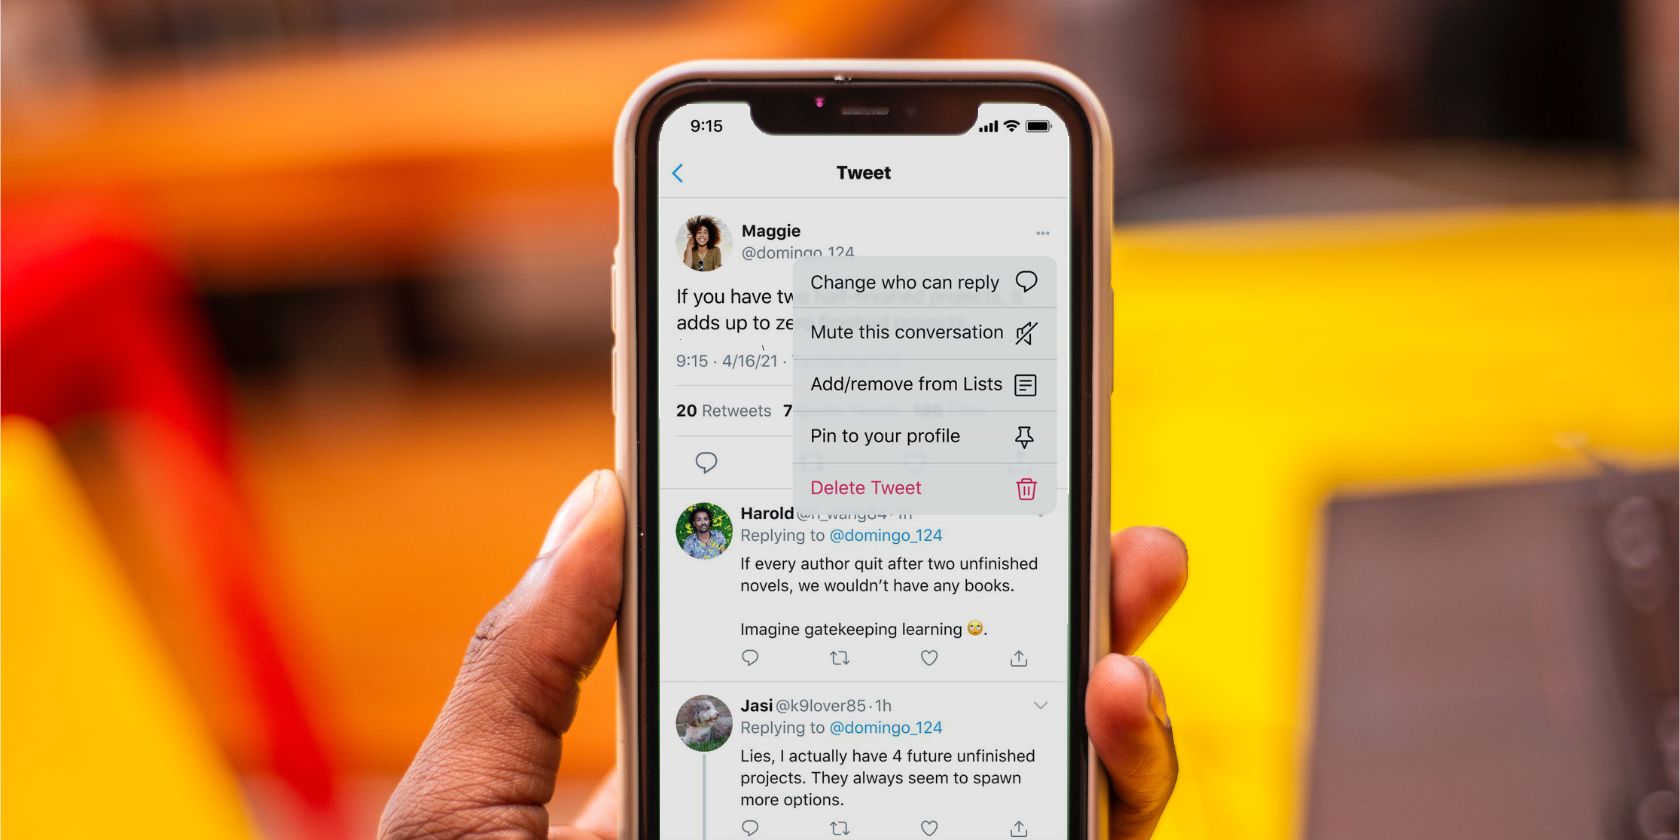 Twitter's new change who can reply feature on an iPhone being held